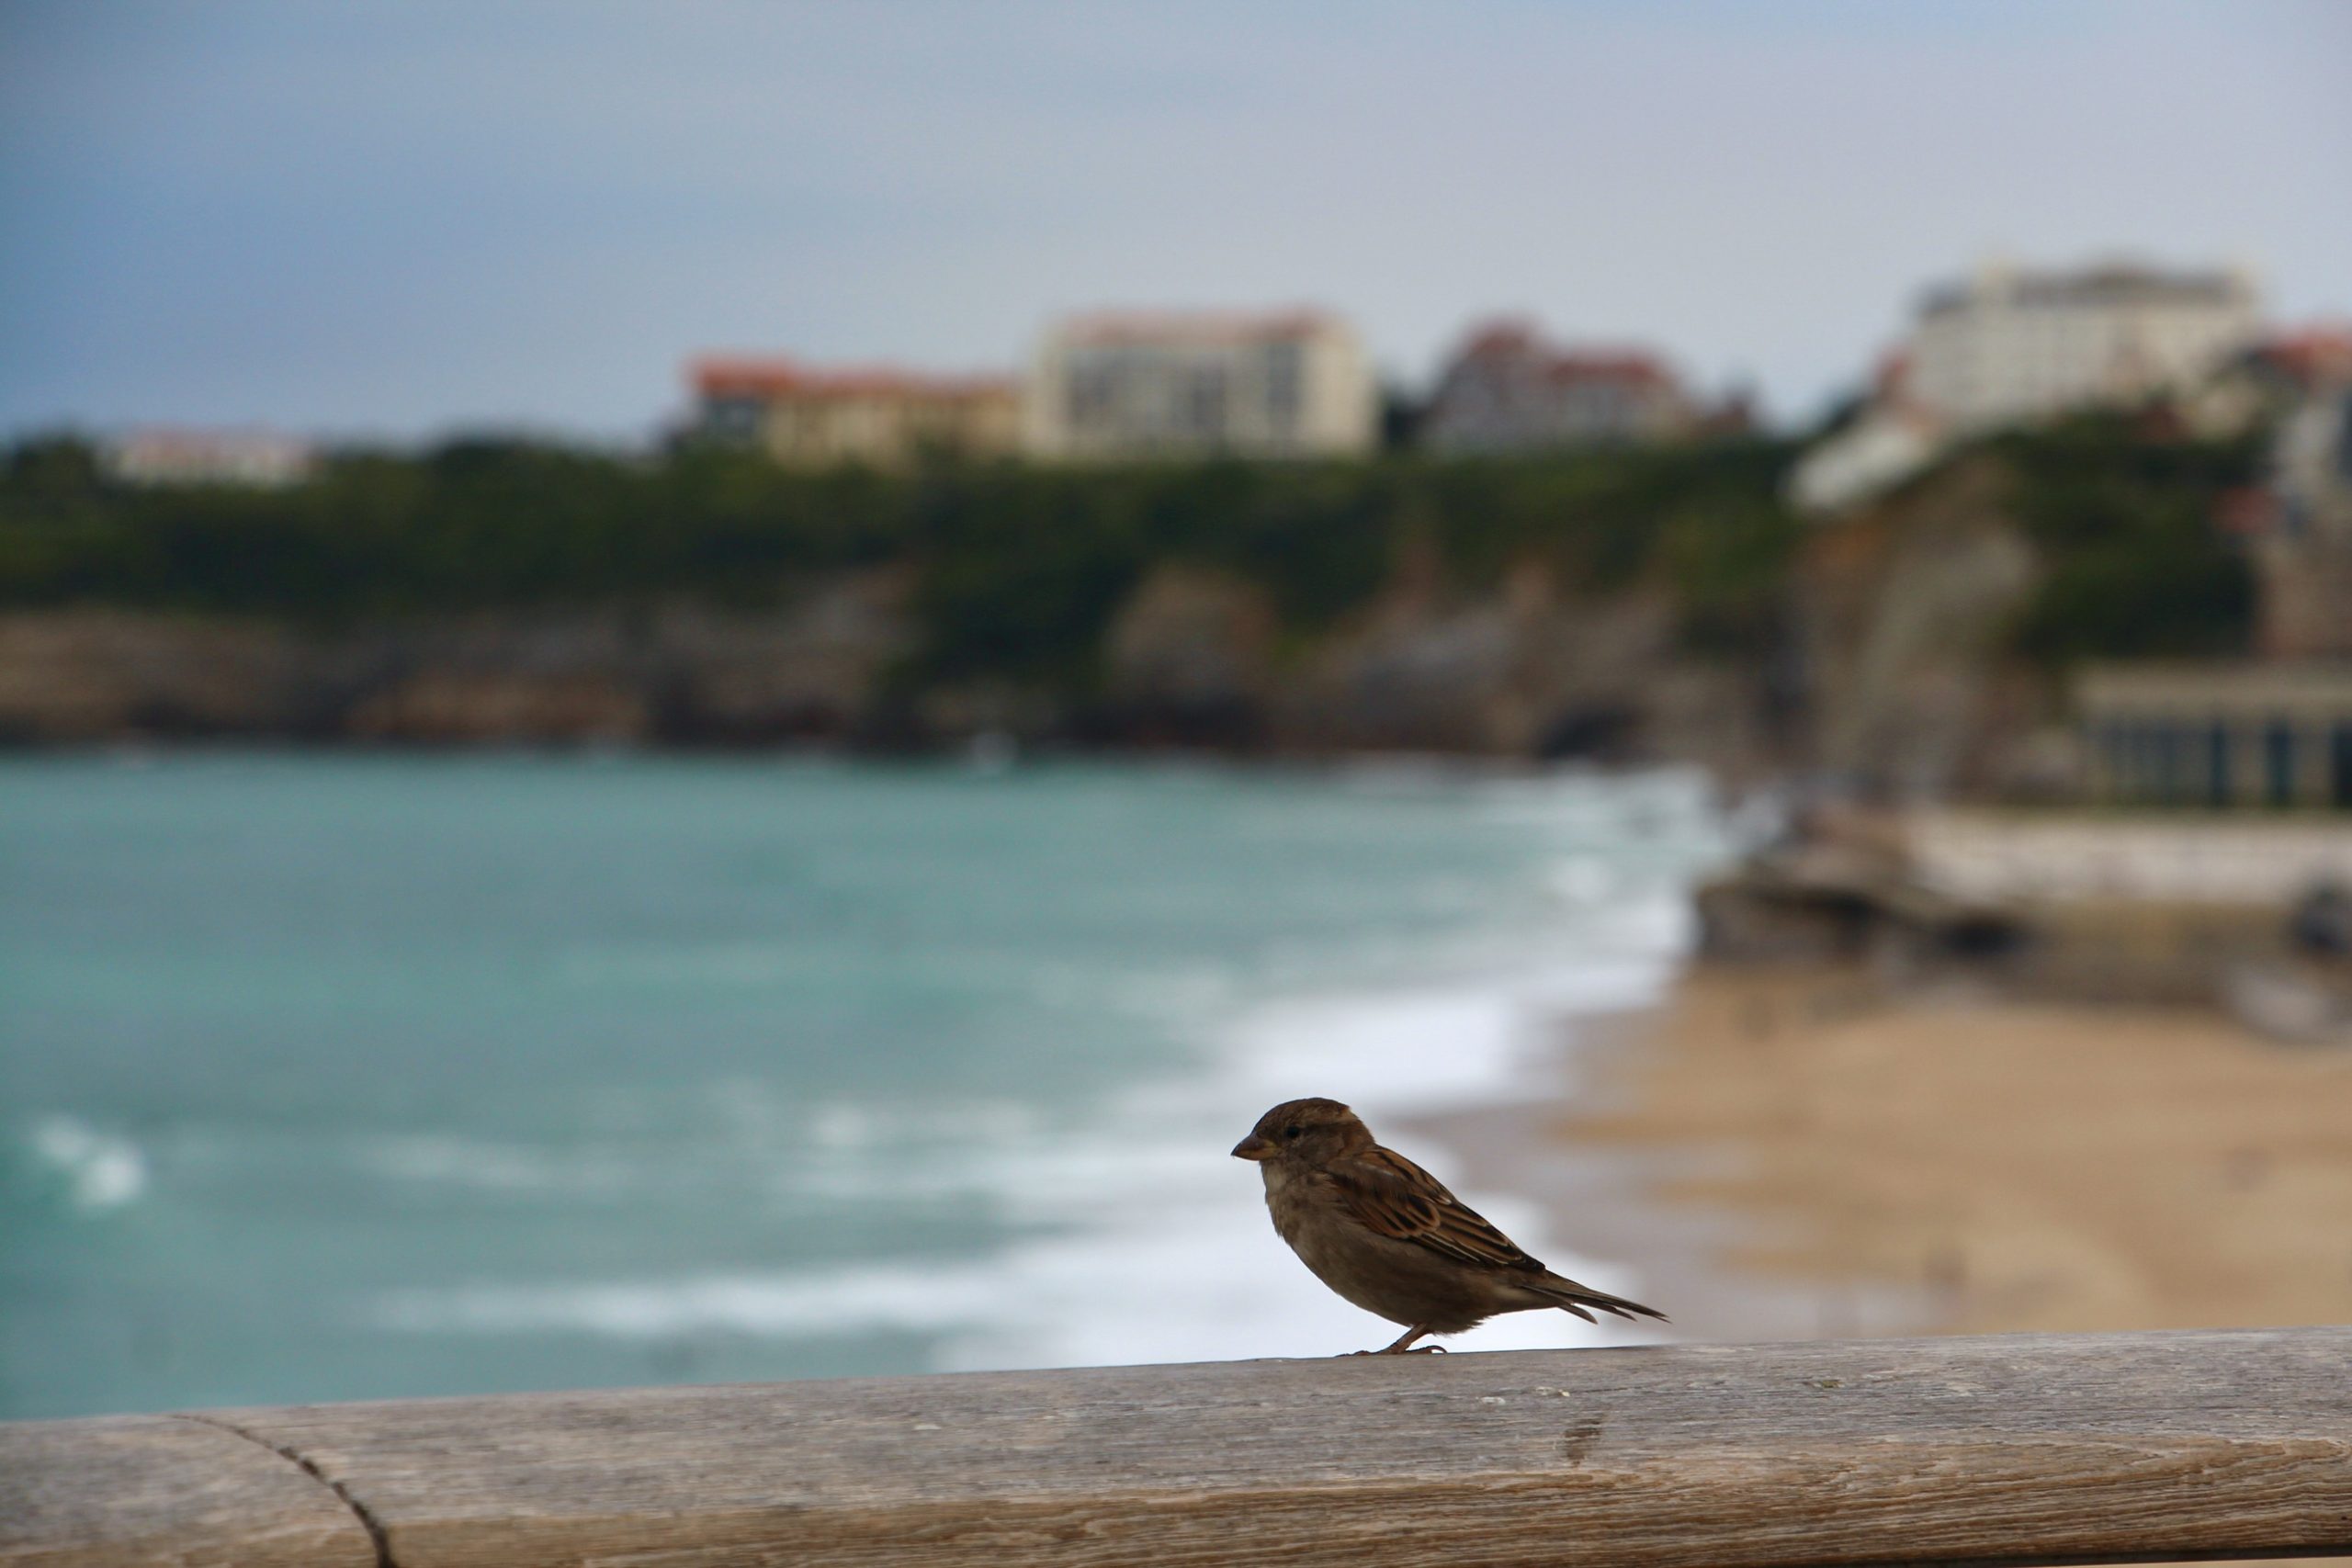 A close-up shot of a bird perched in front of a view of the Grande Plage in Biarritz, France.